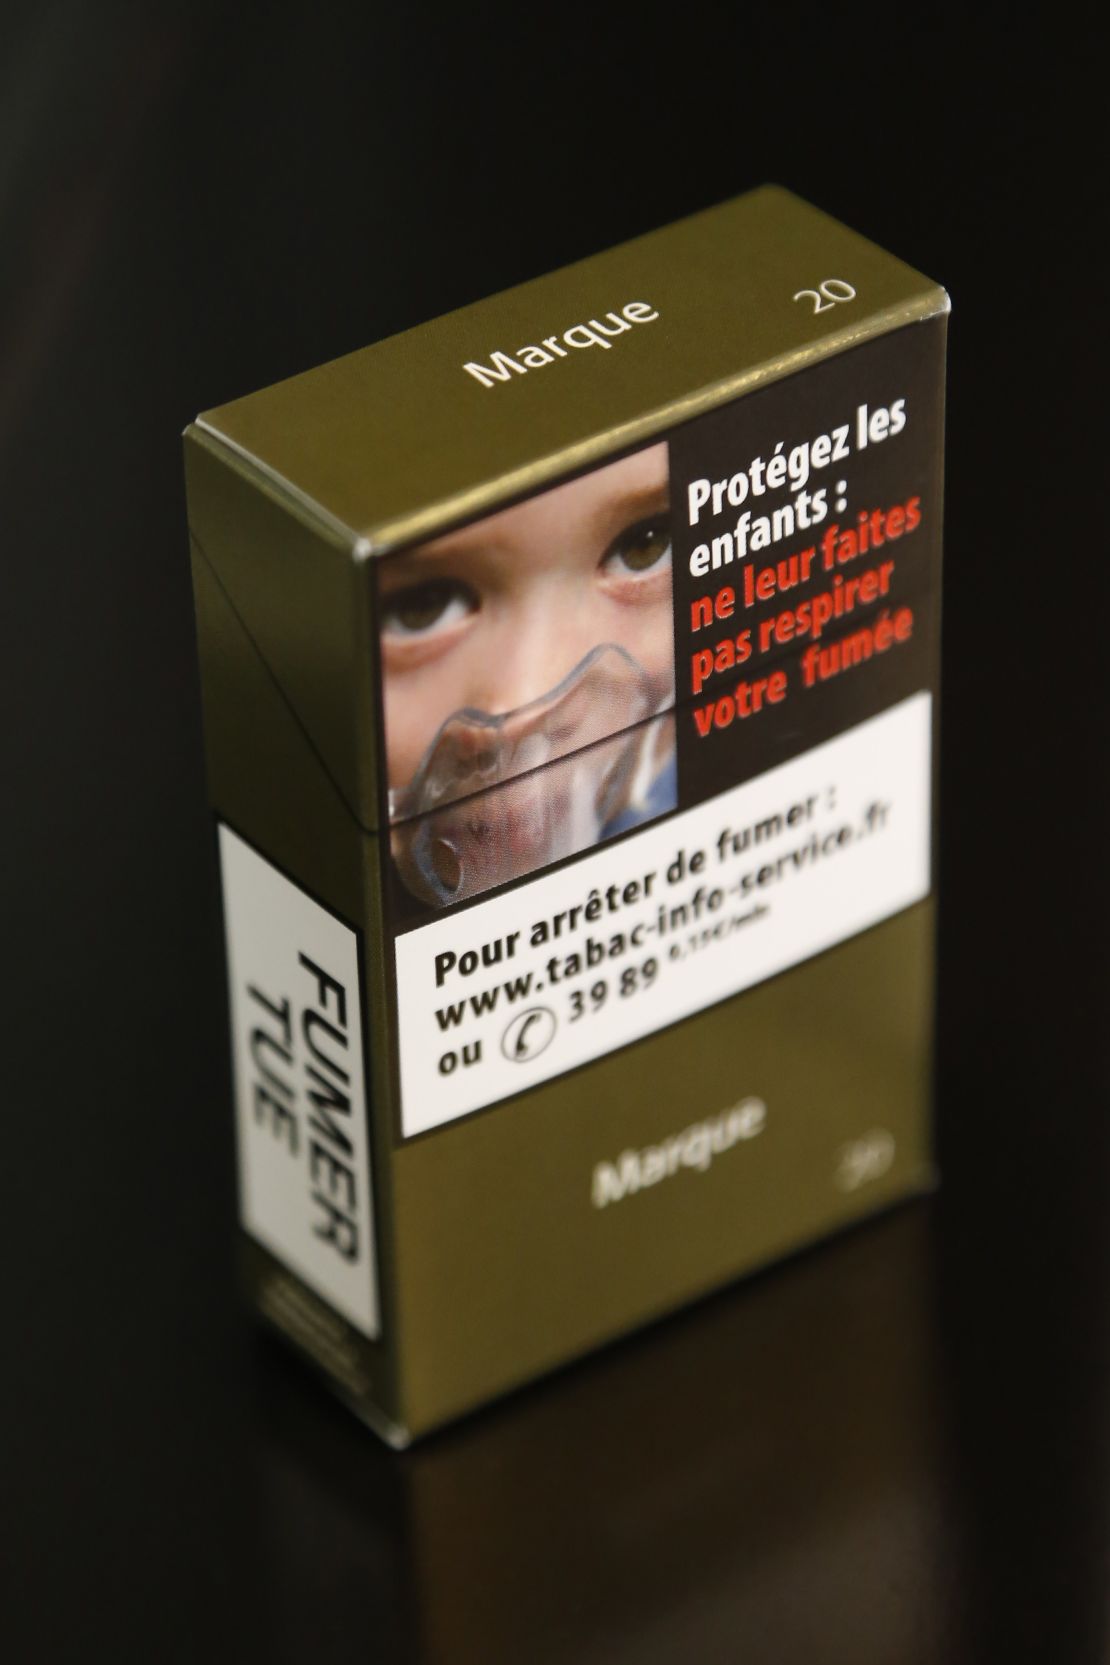 France will also introduce plain cigarette packaging.